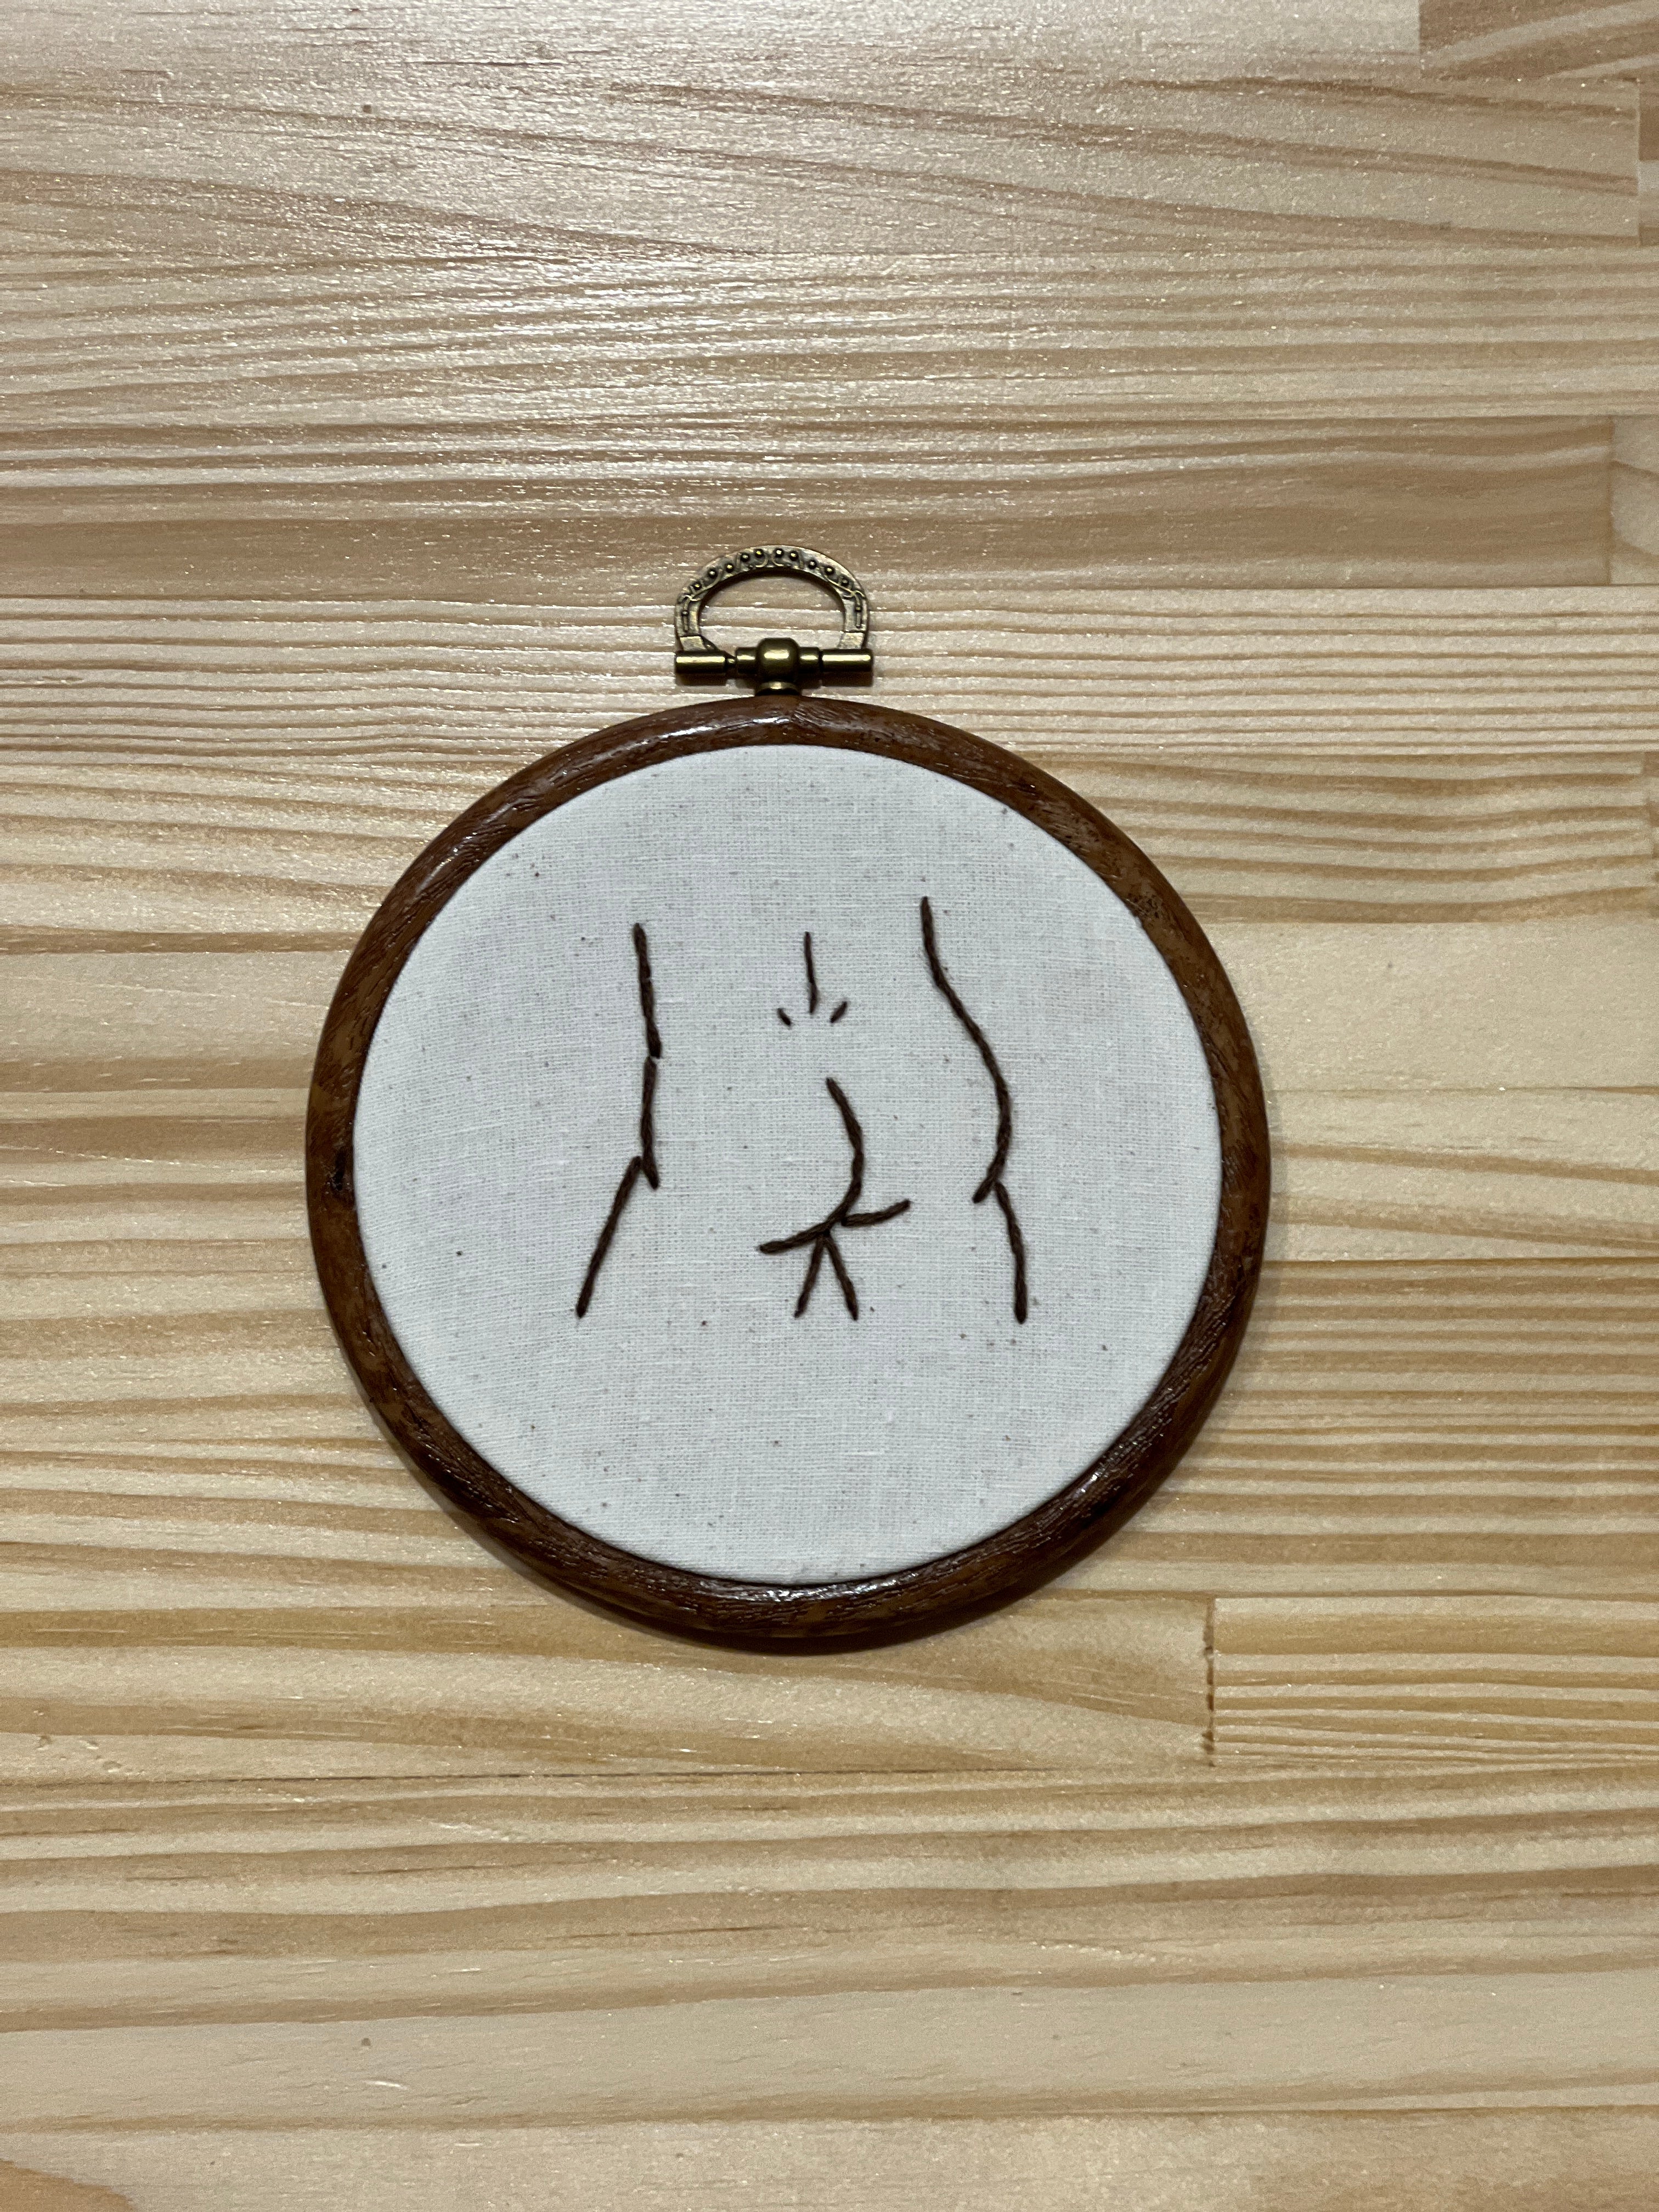 His Butt | Framed Embroidery